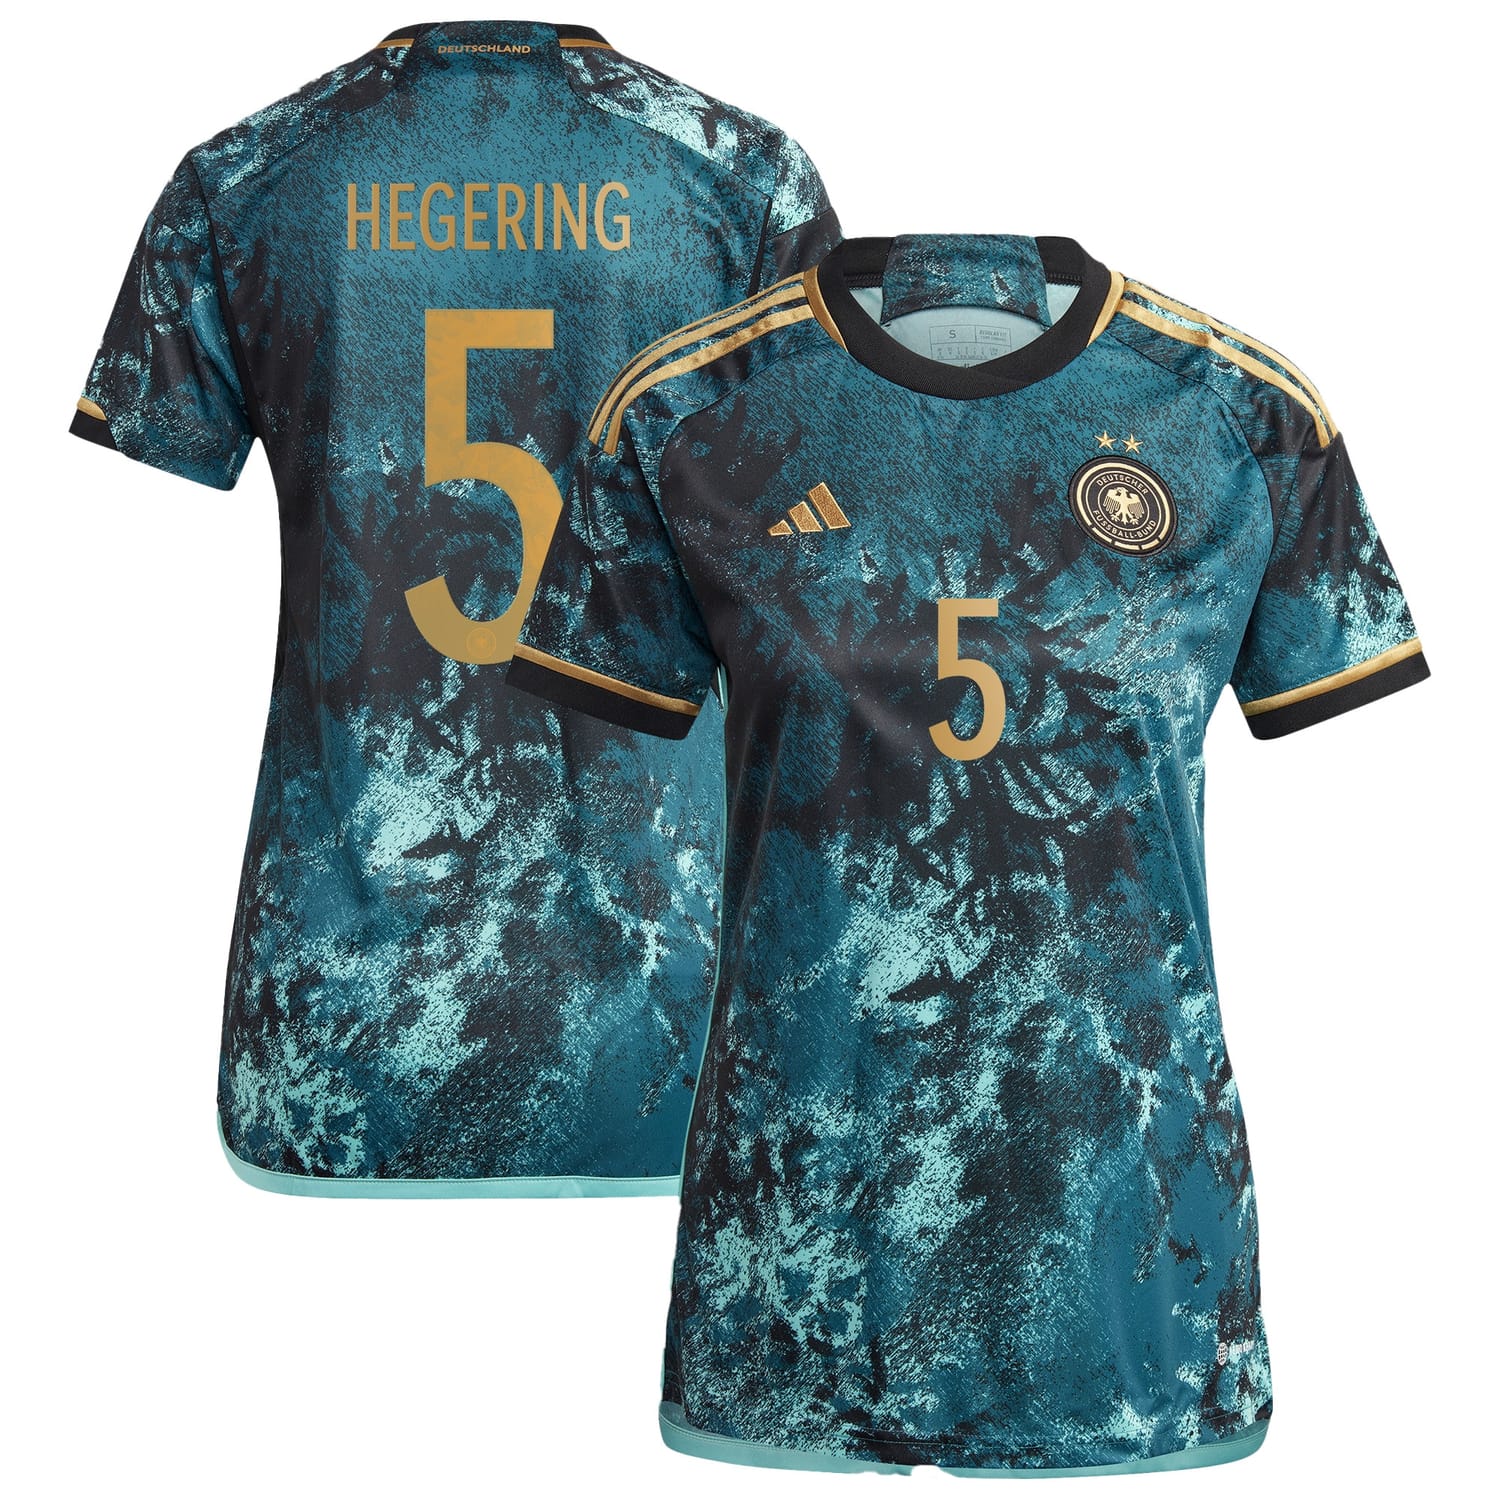 Germany National Team Away Jersey Shirt 2023 player Hegering 5 printing for Women